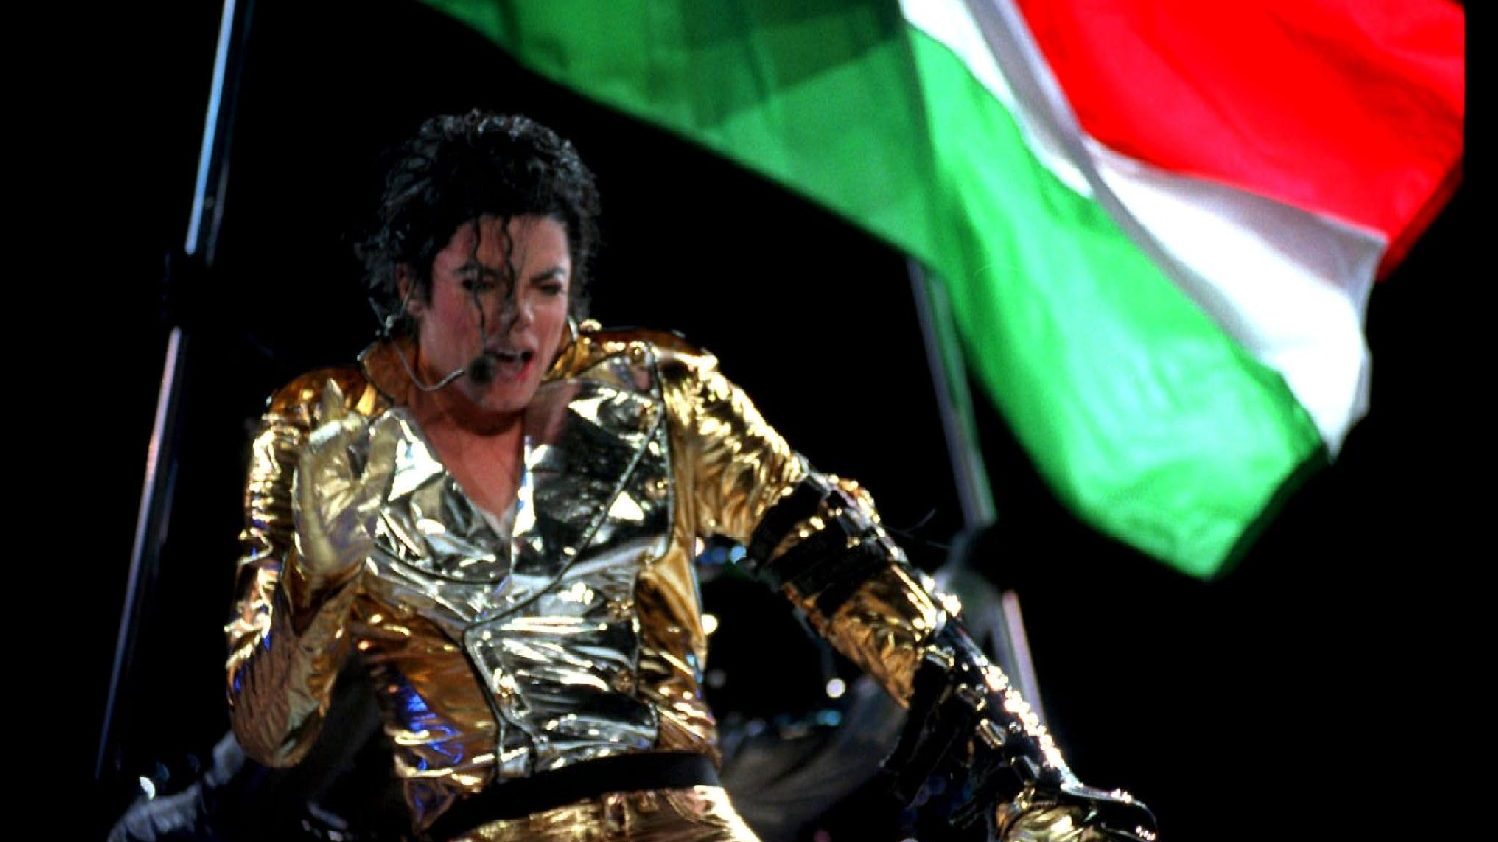 Michael Jackson giving concert in Budapest